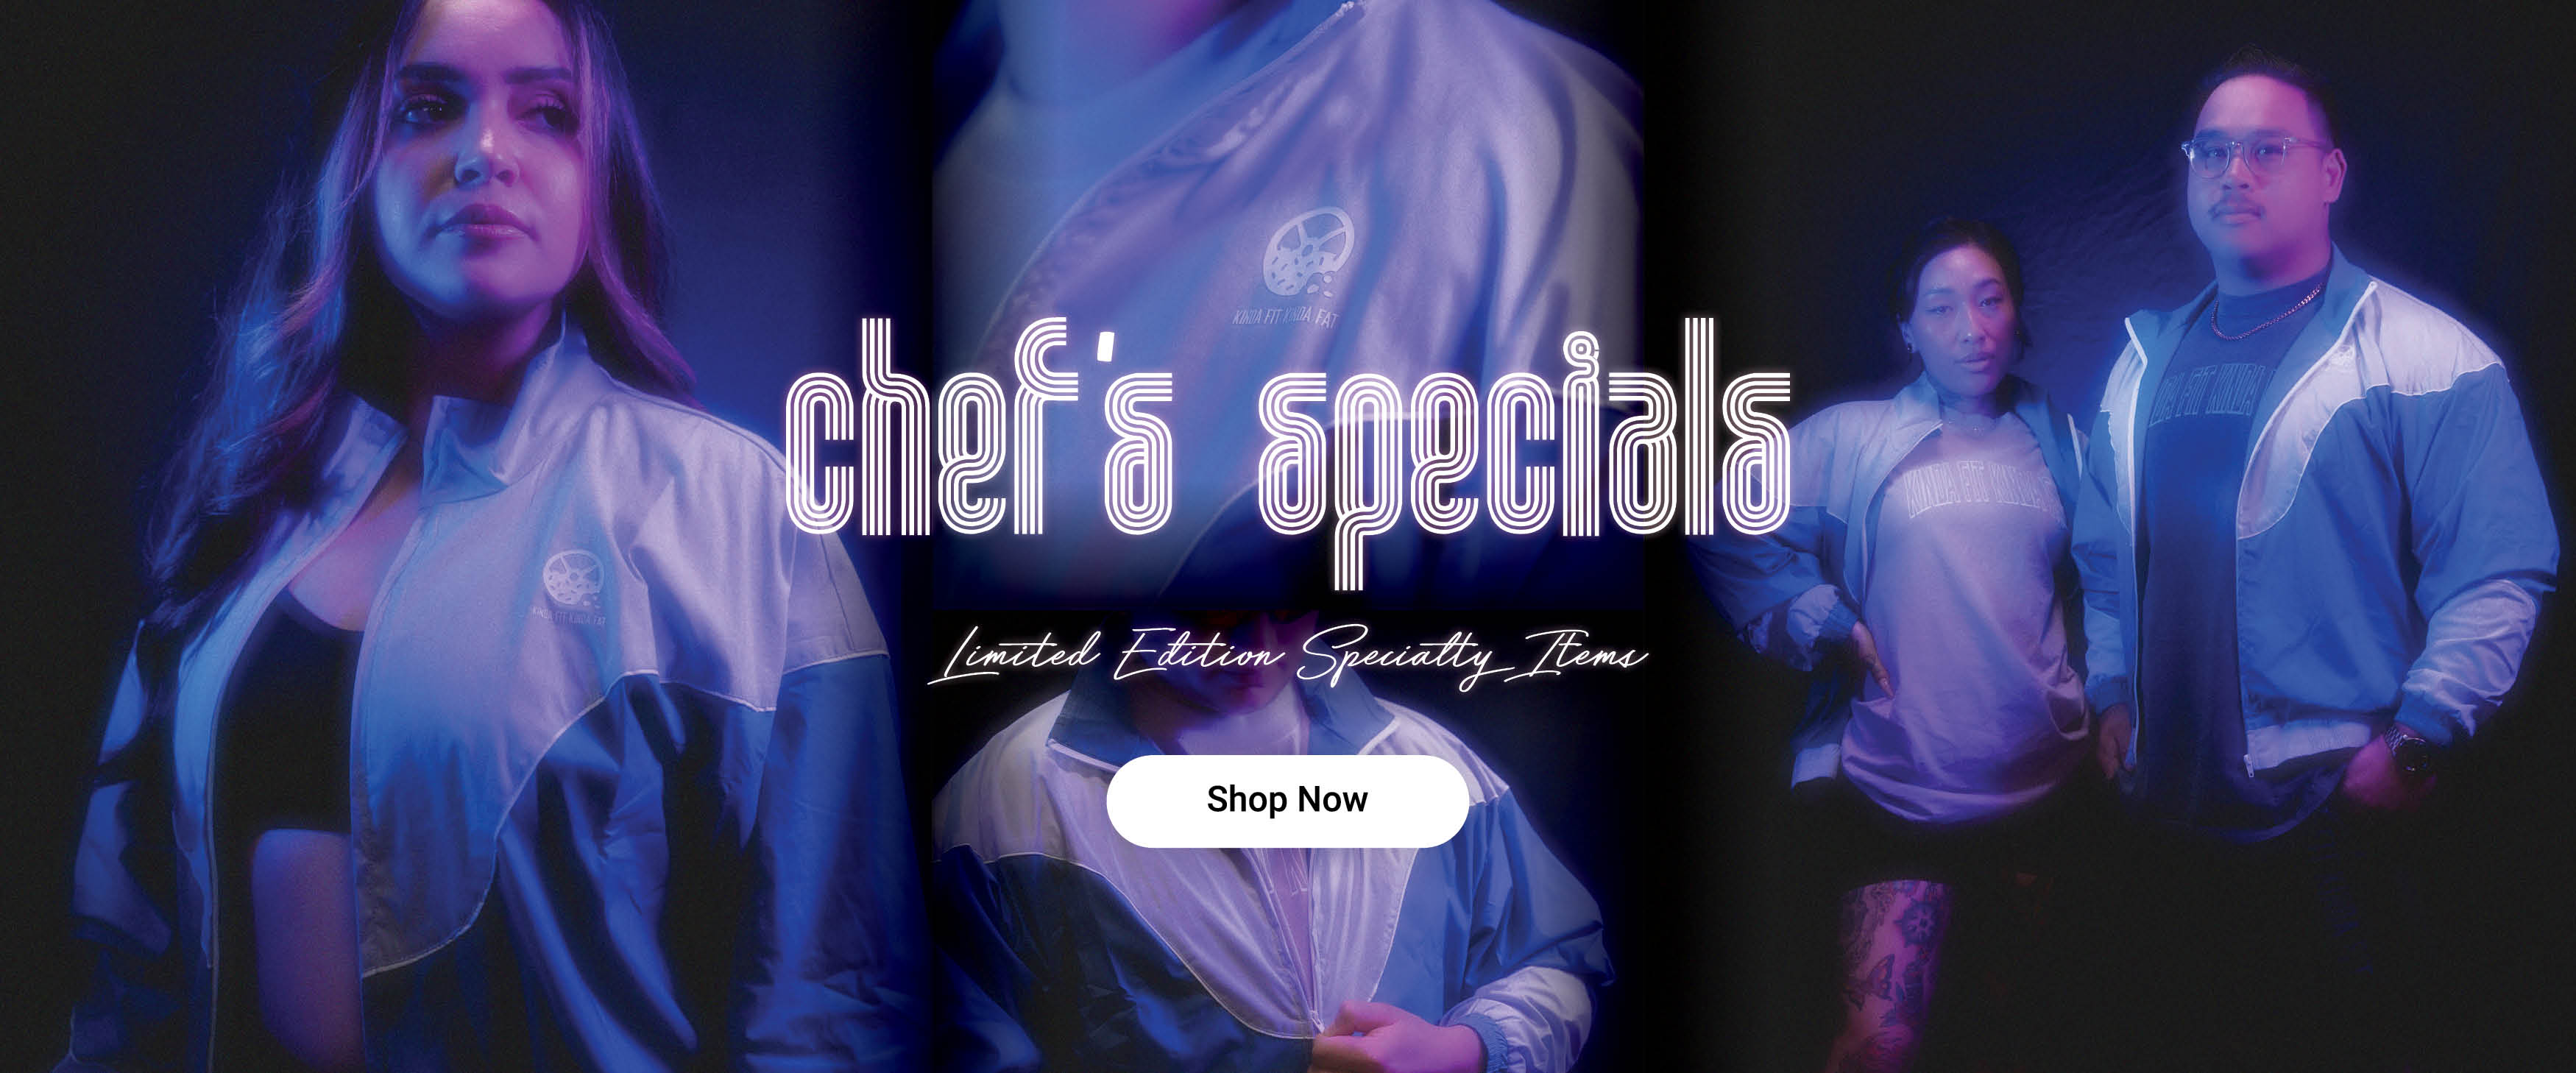 chef specials available in a track jacket and dog hoodie